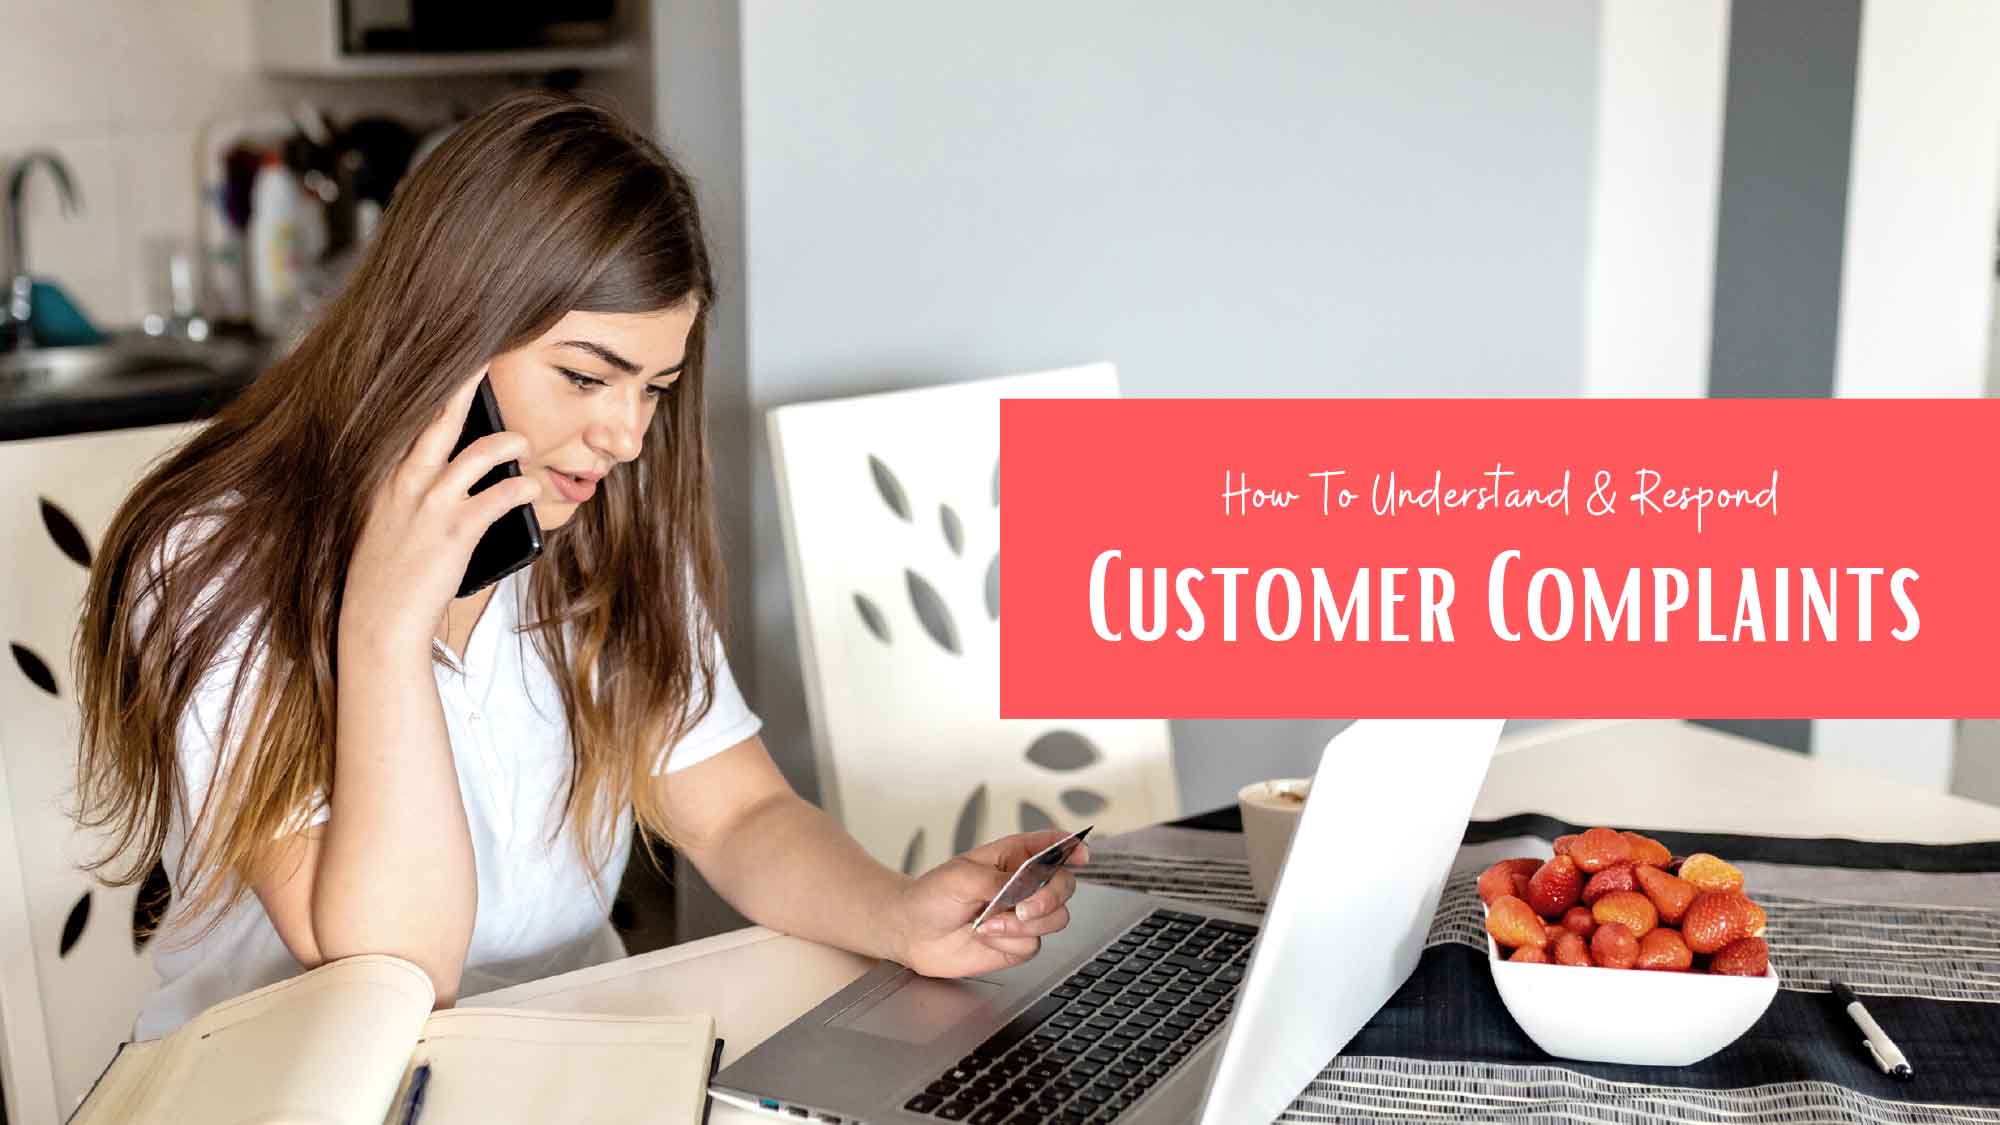 Find Out How To Understand & Respond To Customer Complaints